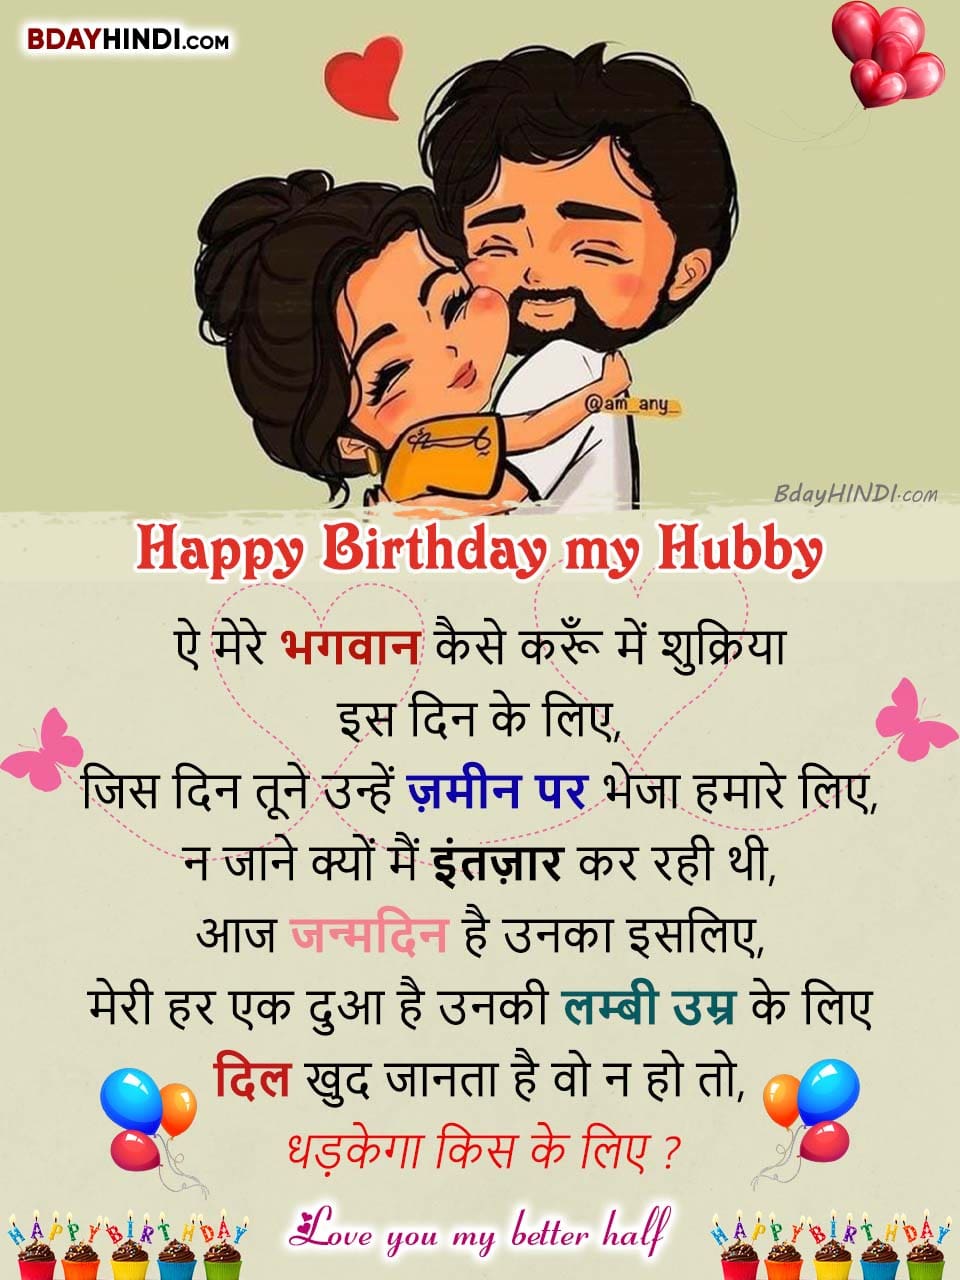 Birthday Wishes For Husband in Hindi